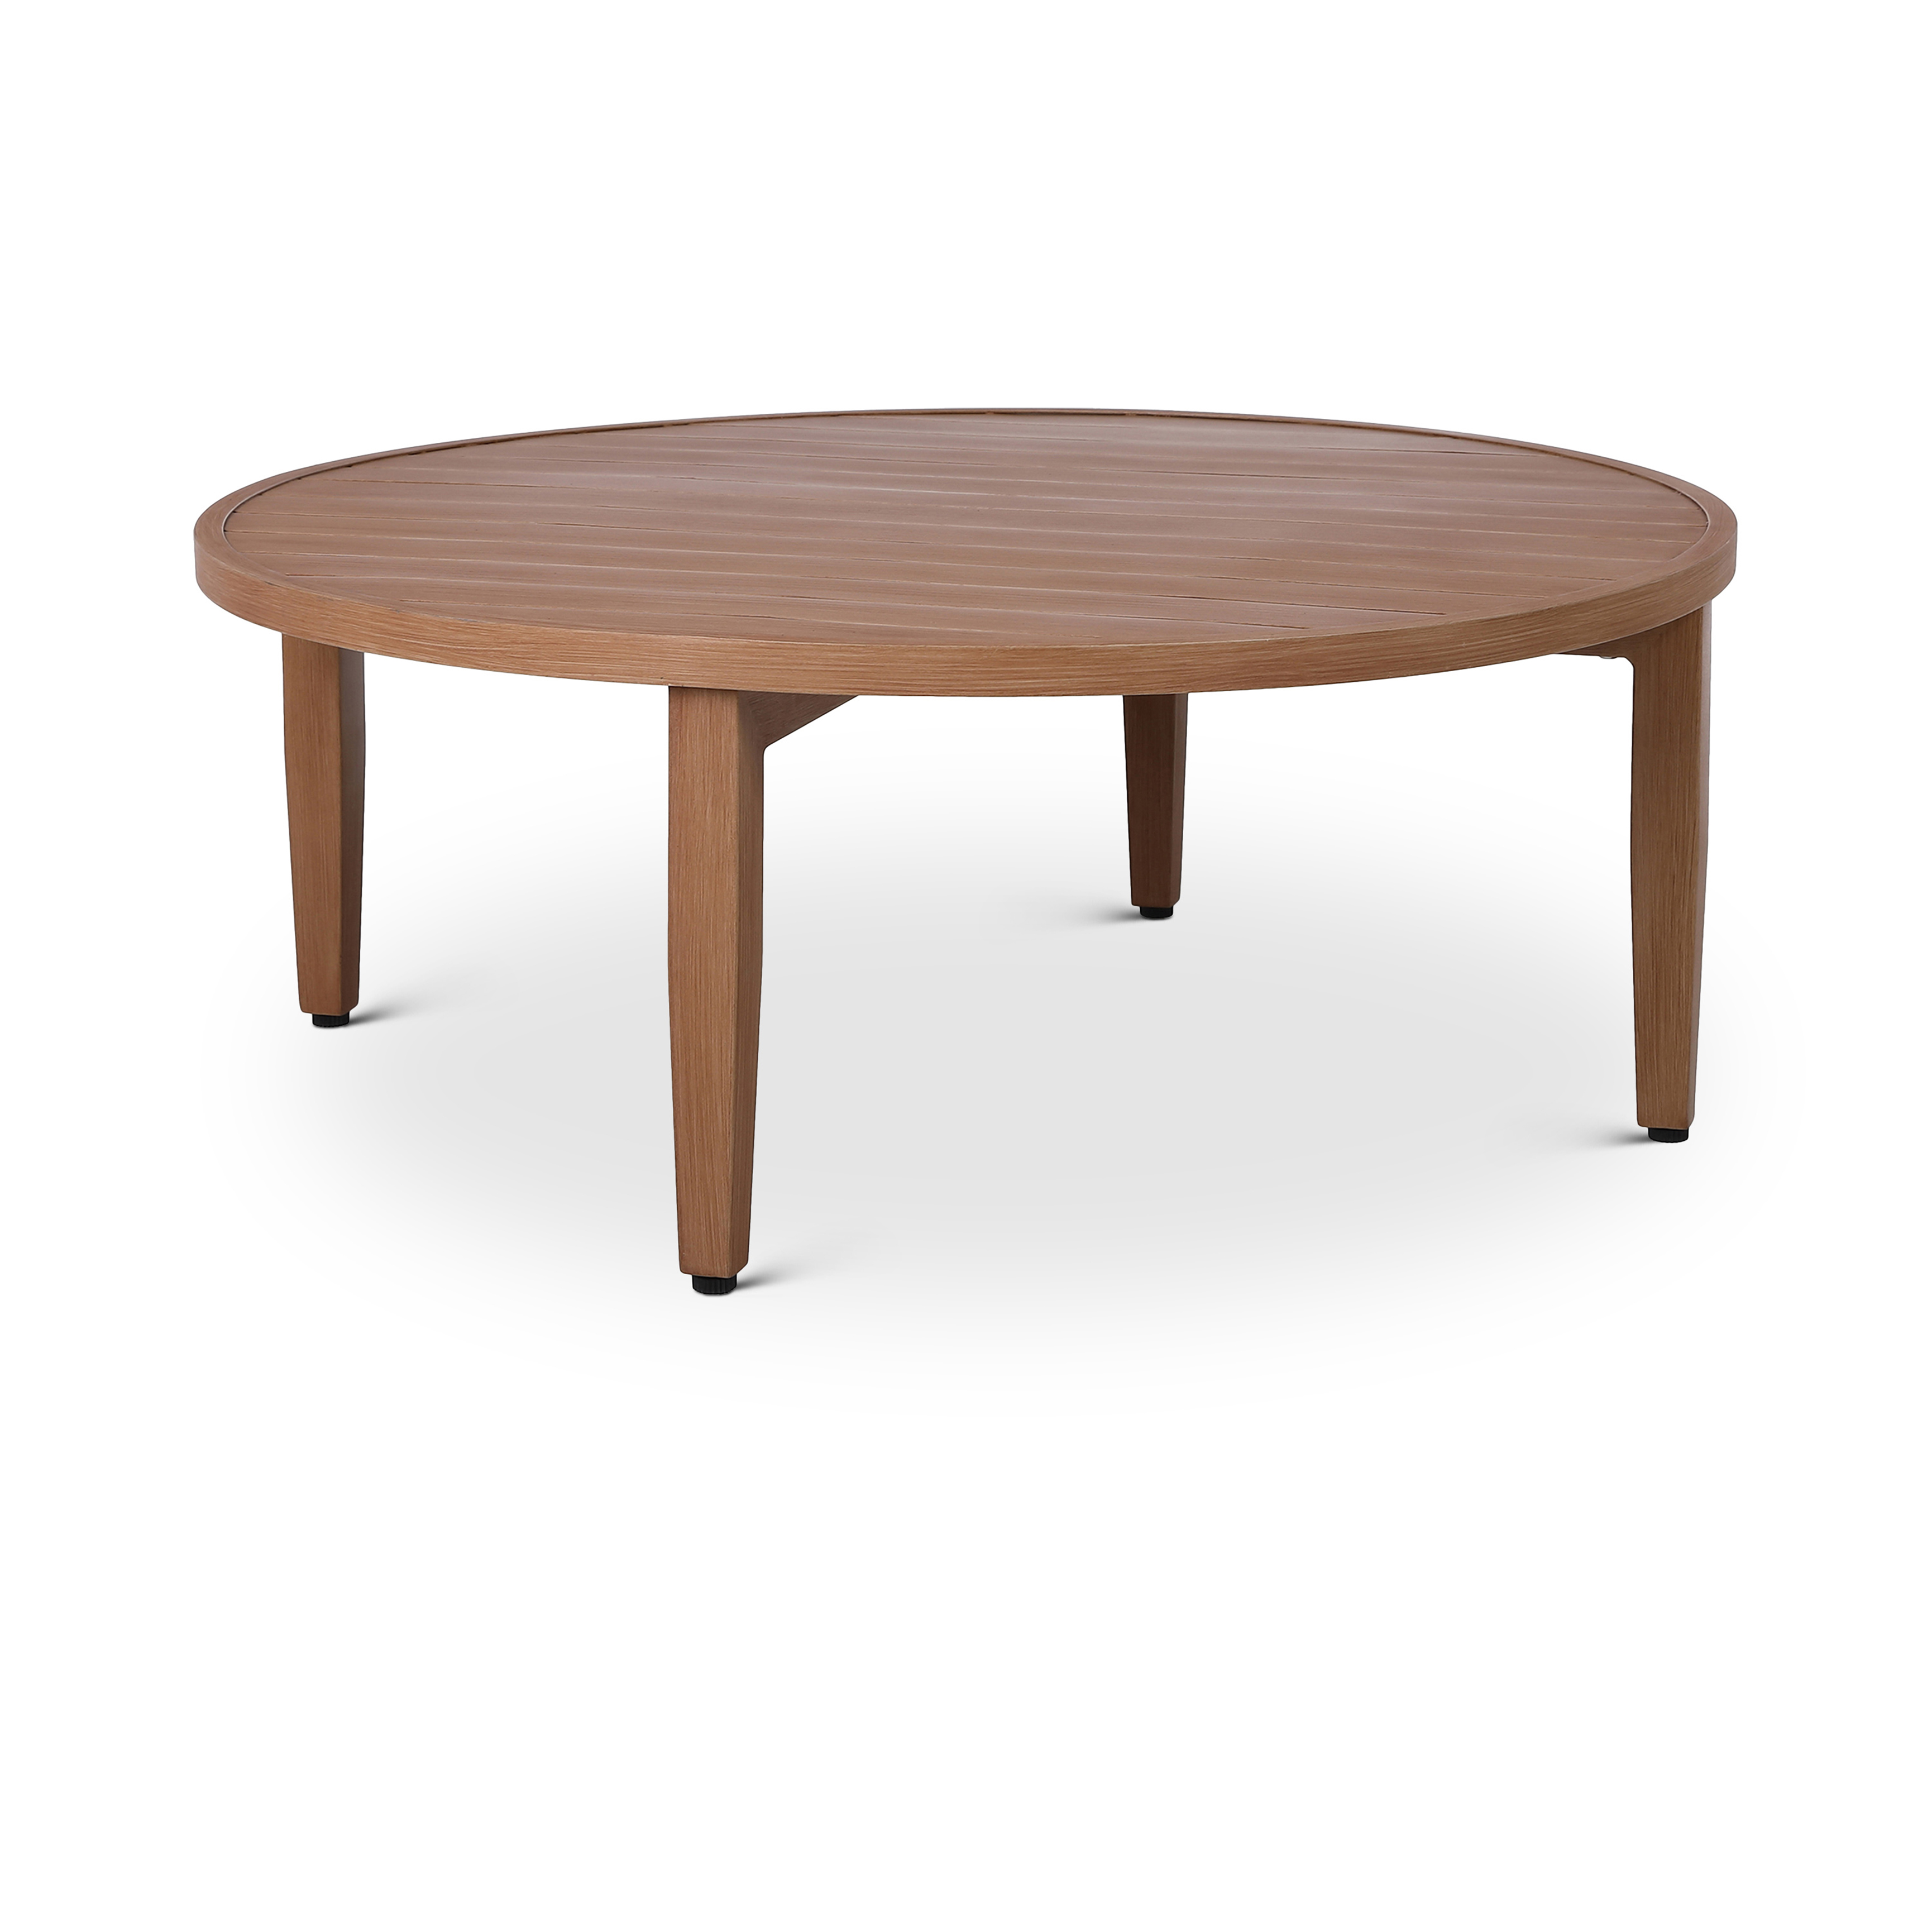 Maui Outdoor Patio Coffee Table - Natural